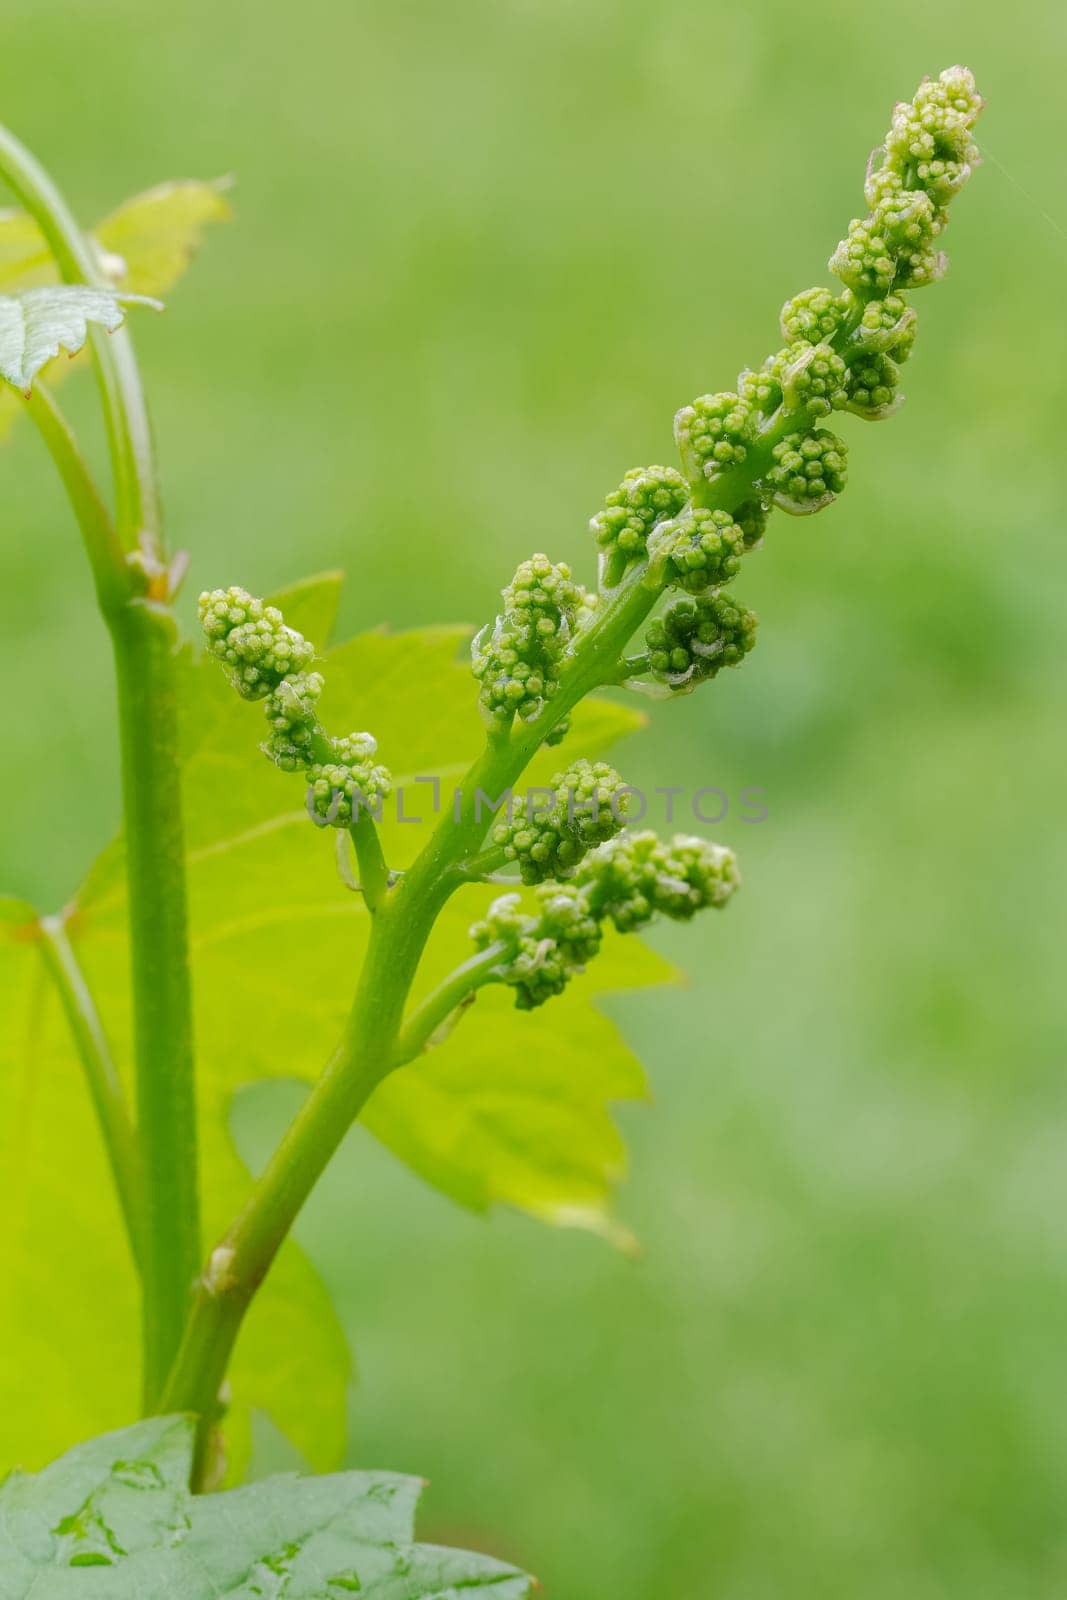 Blooming young wine grapes in vineyard in the spring time. Bunches of grapes before flowering. Shallow depth of field.